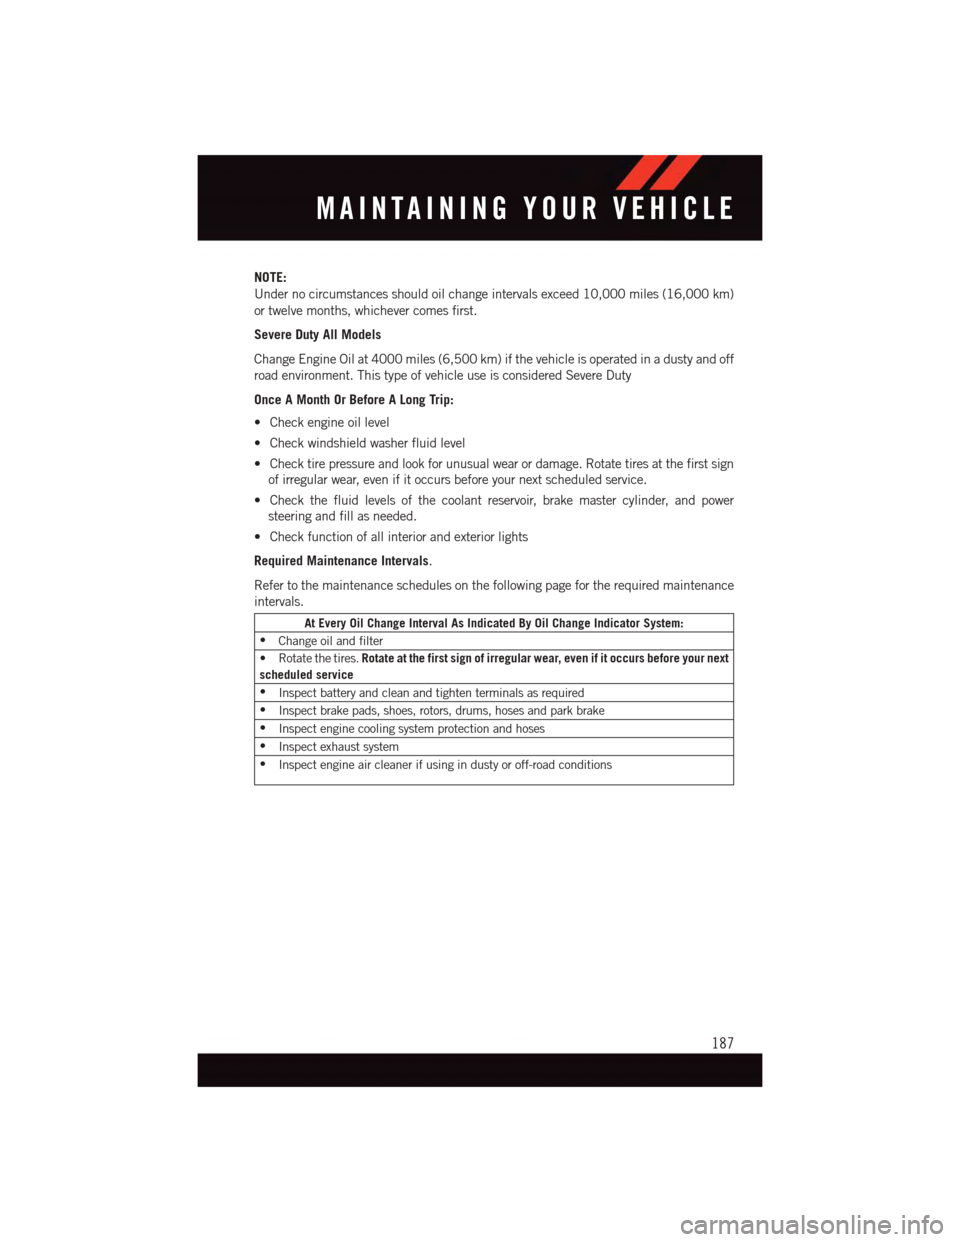 DODGE CHALLENGER 2015 3.G User Guide NOTE:
Under no circumstances should oil change intervals exceed 10,000 miles (16,000 km)
or twelve months, whichever comes first.
Severe Duty All Models
Change Engine Oil at 4000 miles (6,500 km) if t